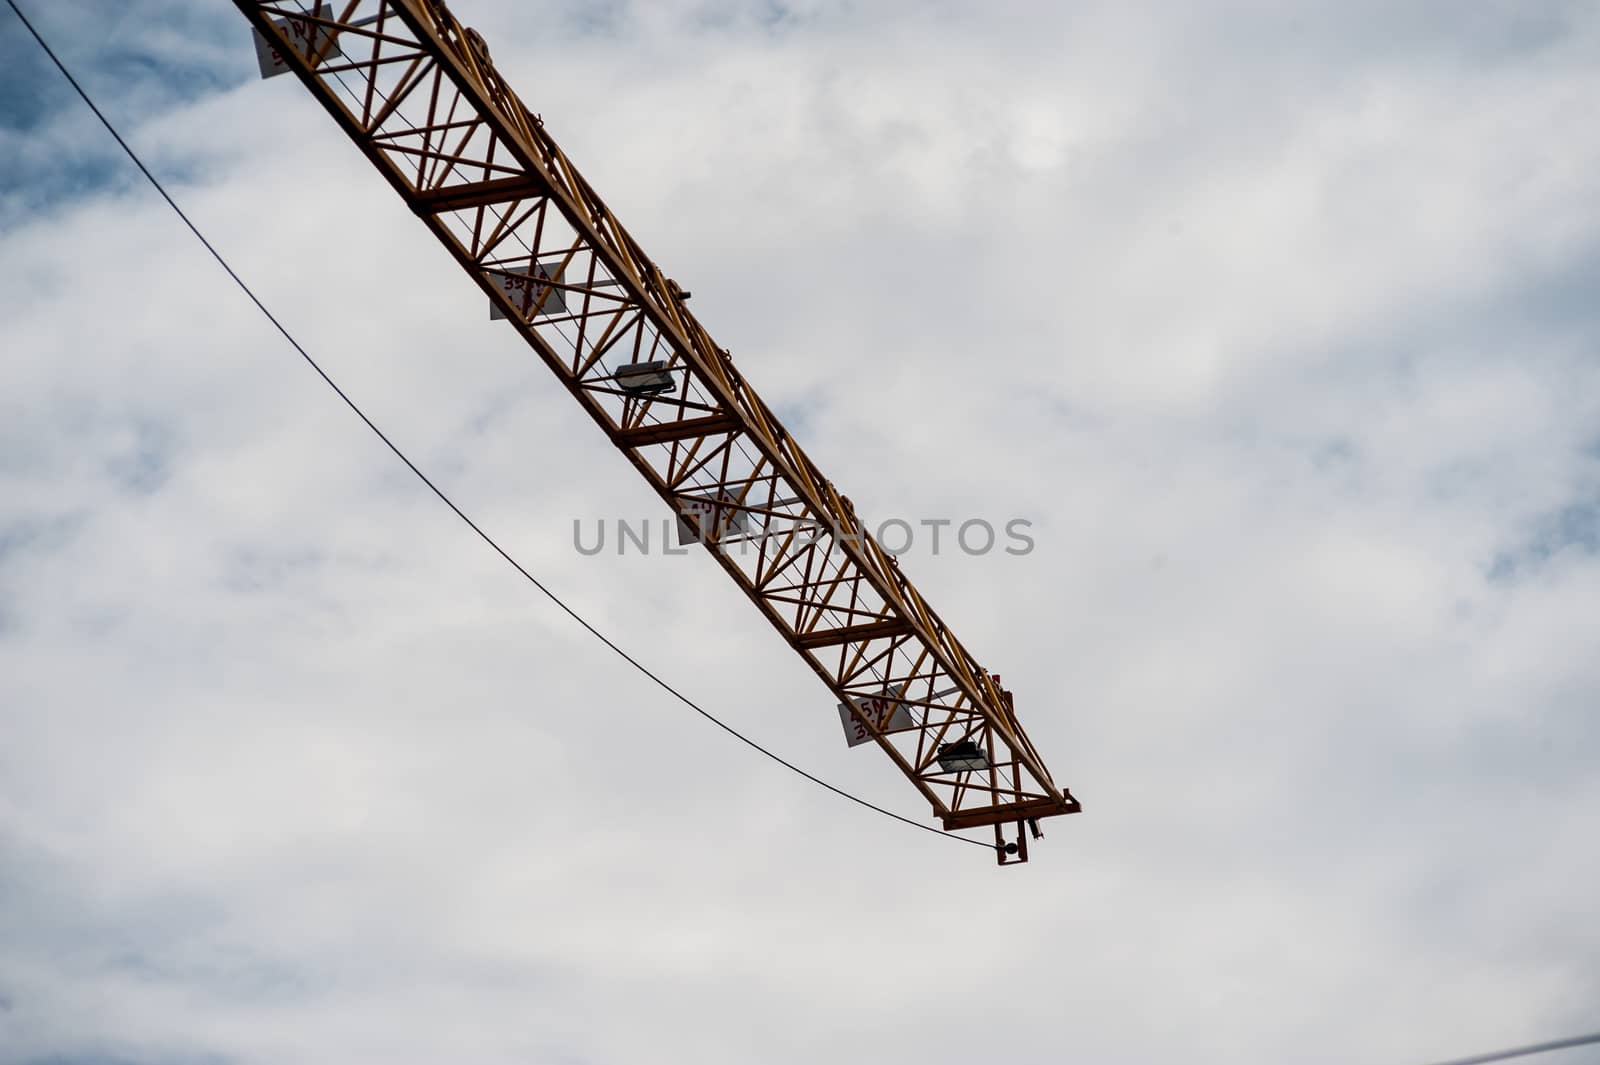 Crane in construction with blue sky by panumazz@gmail.com